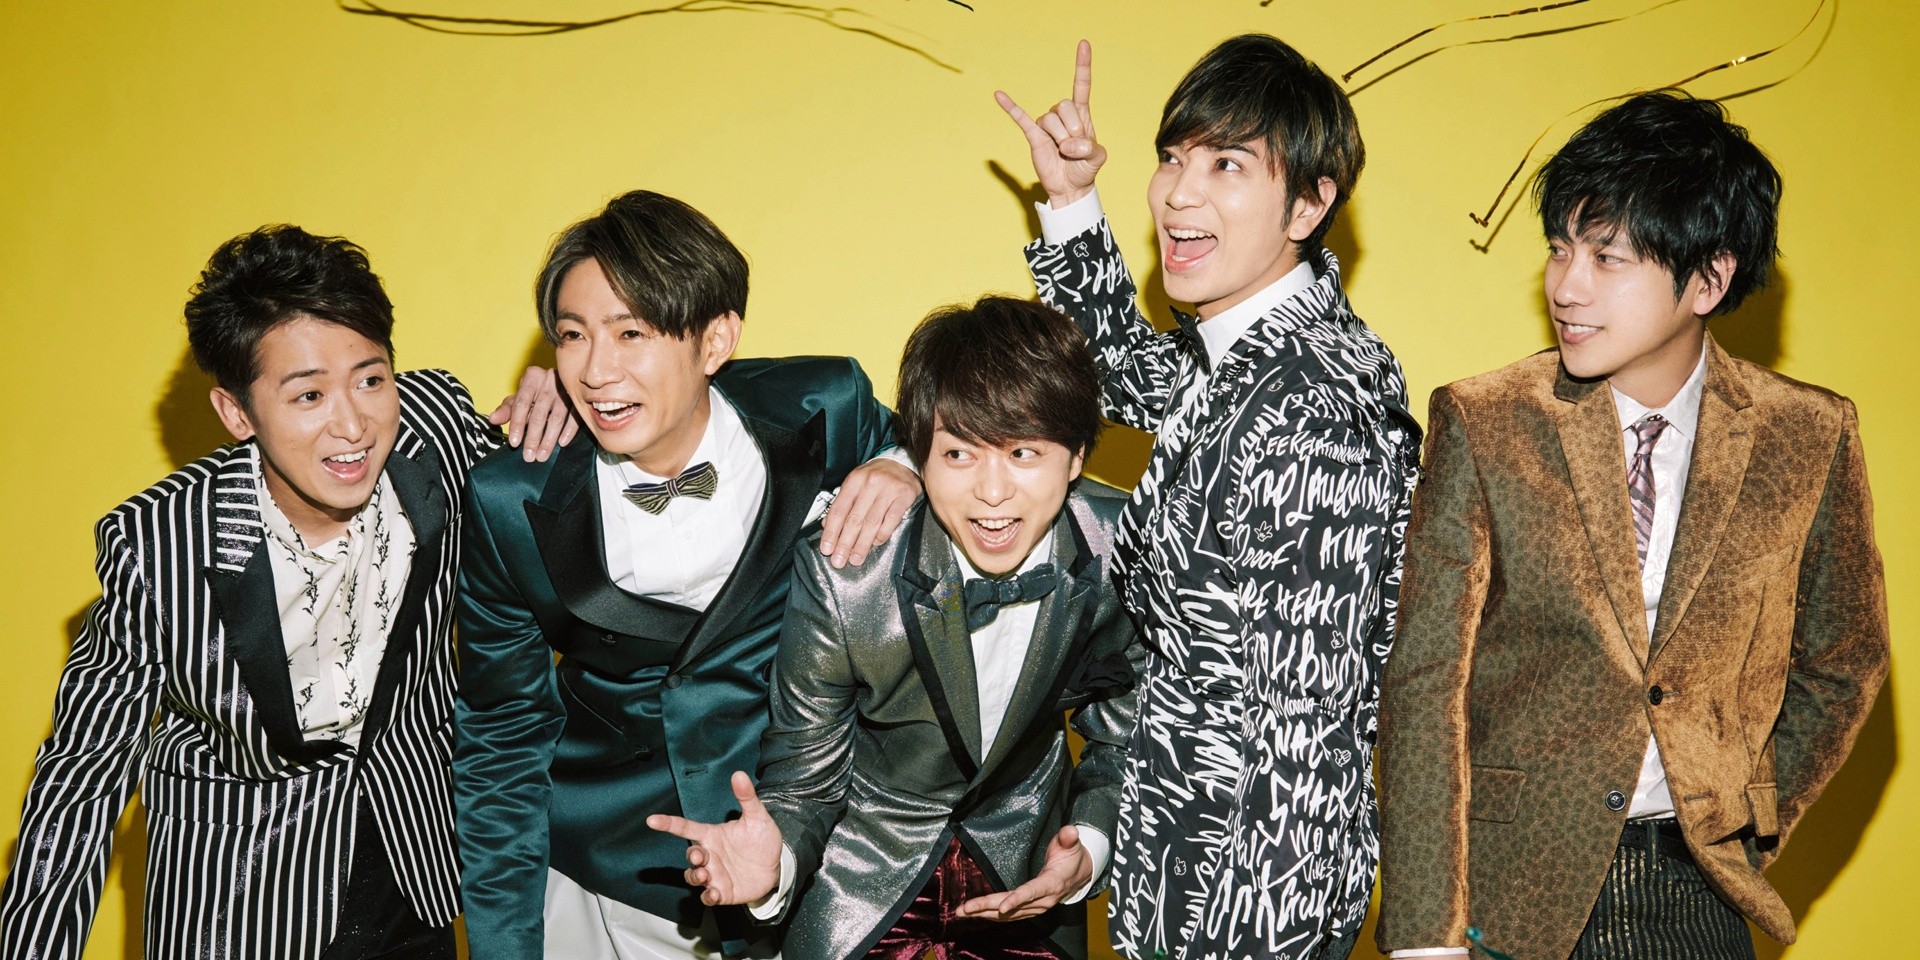 ARASHI celebrate 21st anniversary with new album This is Arashi, livestream concert, and more 